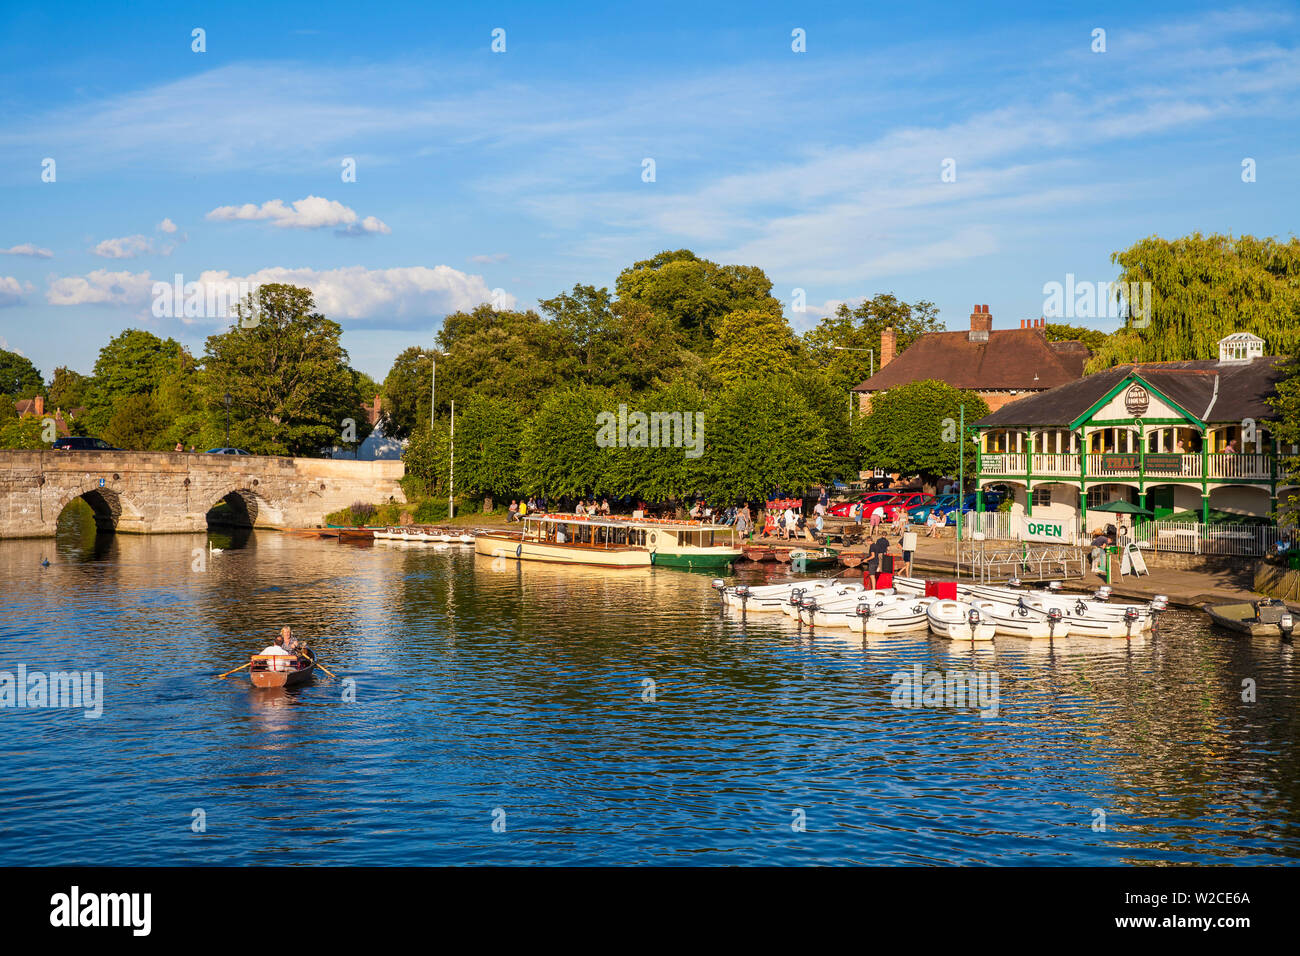 UK, England, West Midlands, Warwickshire, Stratford-upon-Avon, People in row boat on  River Avon Stock Photo